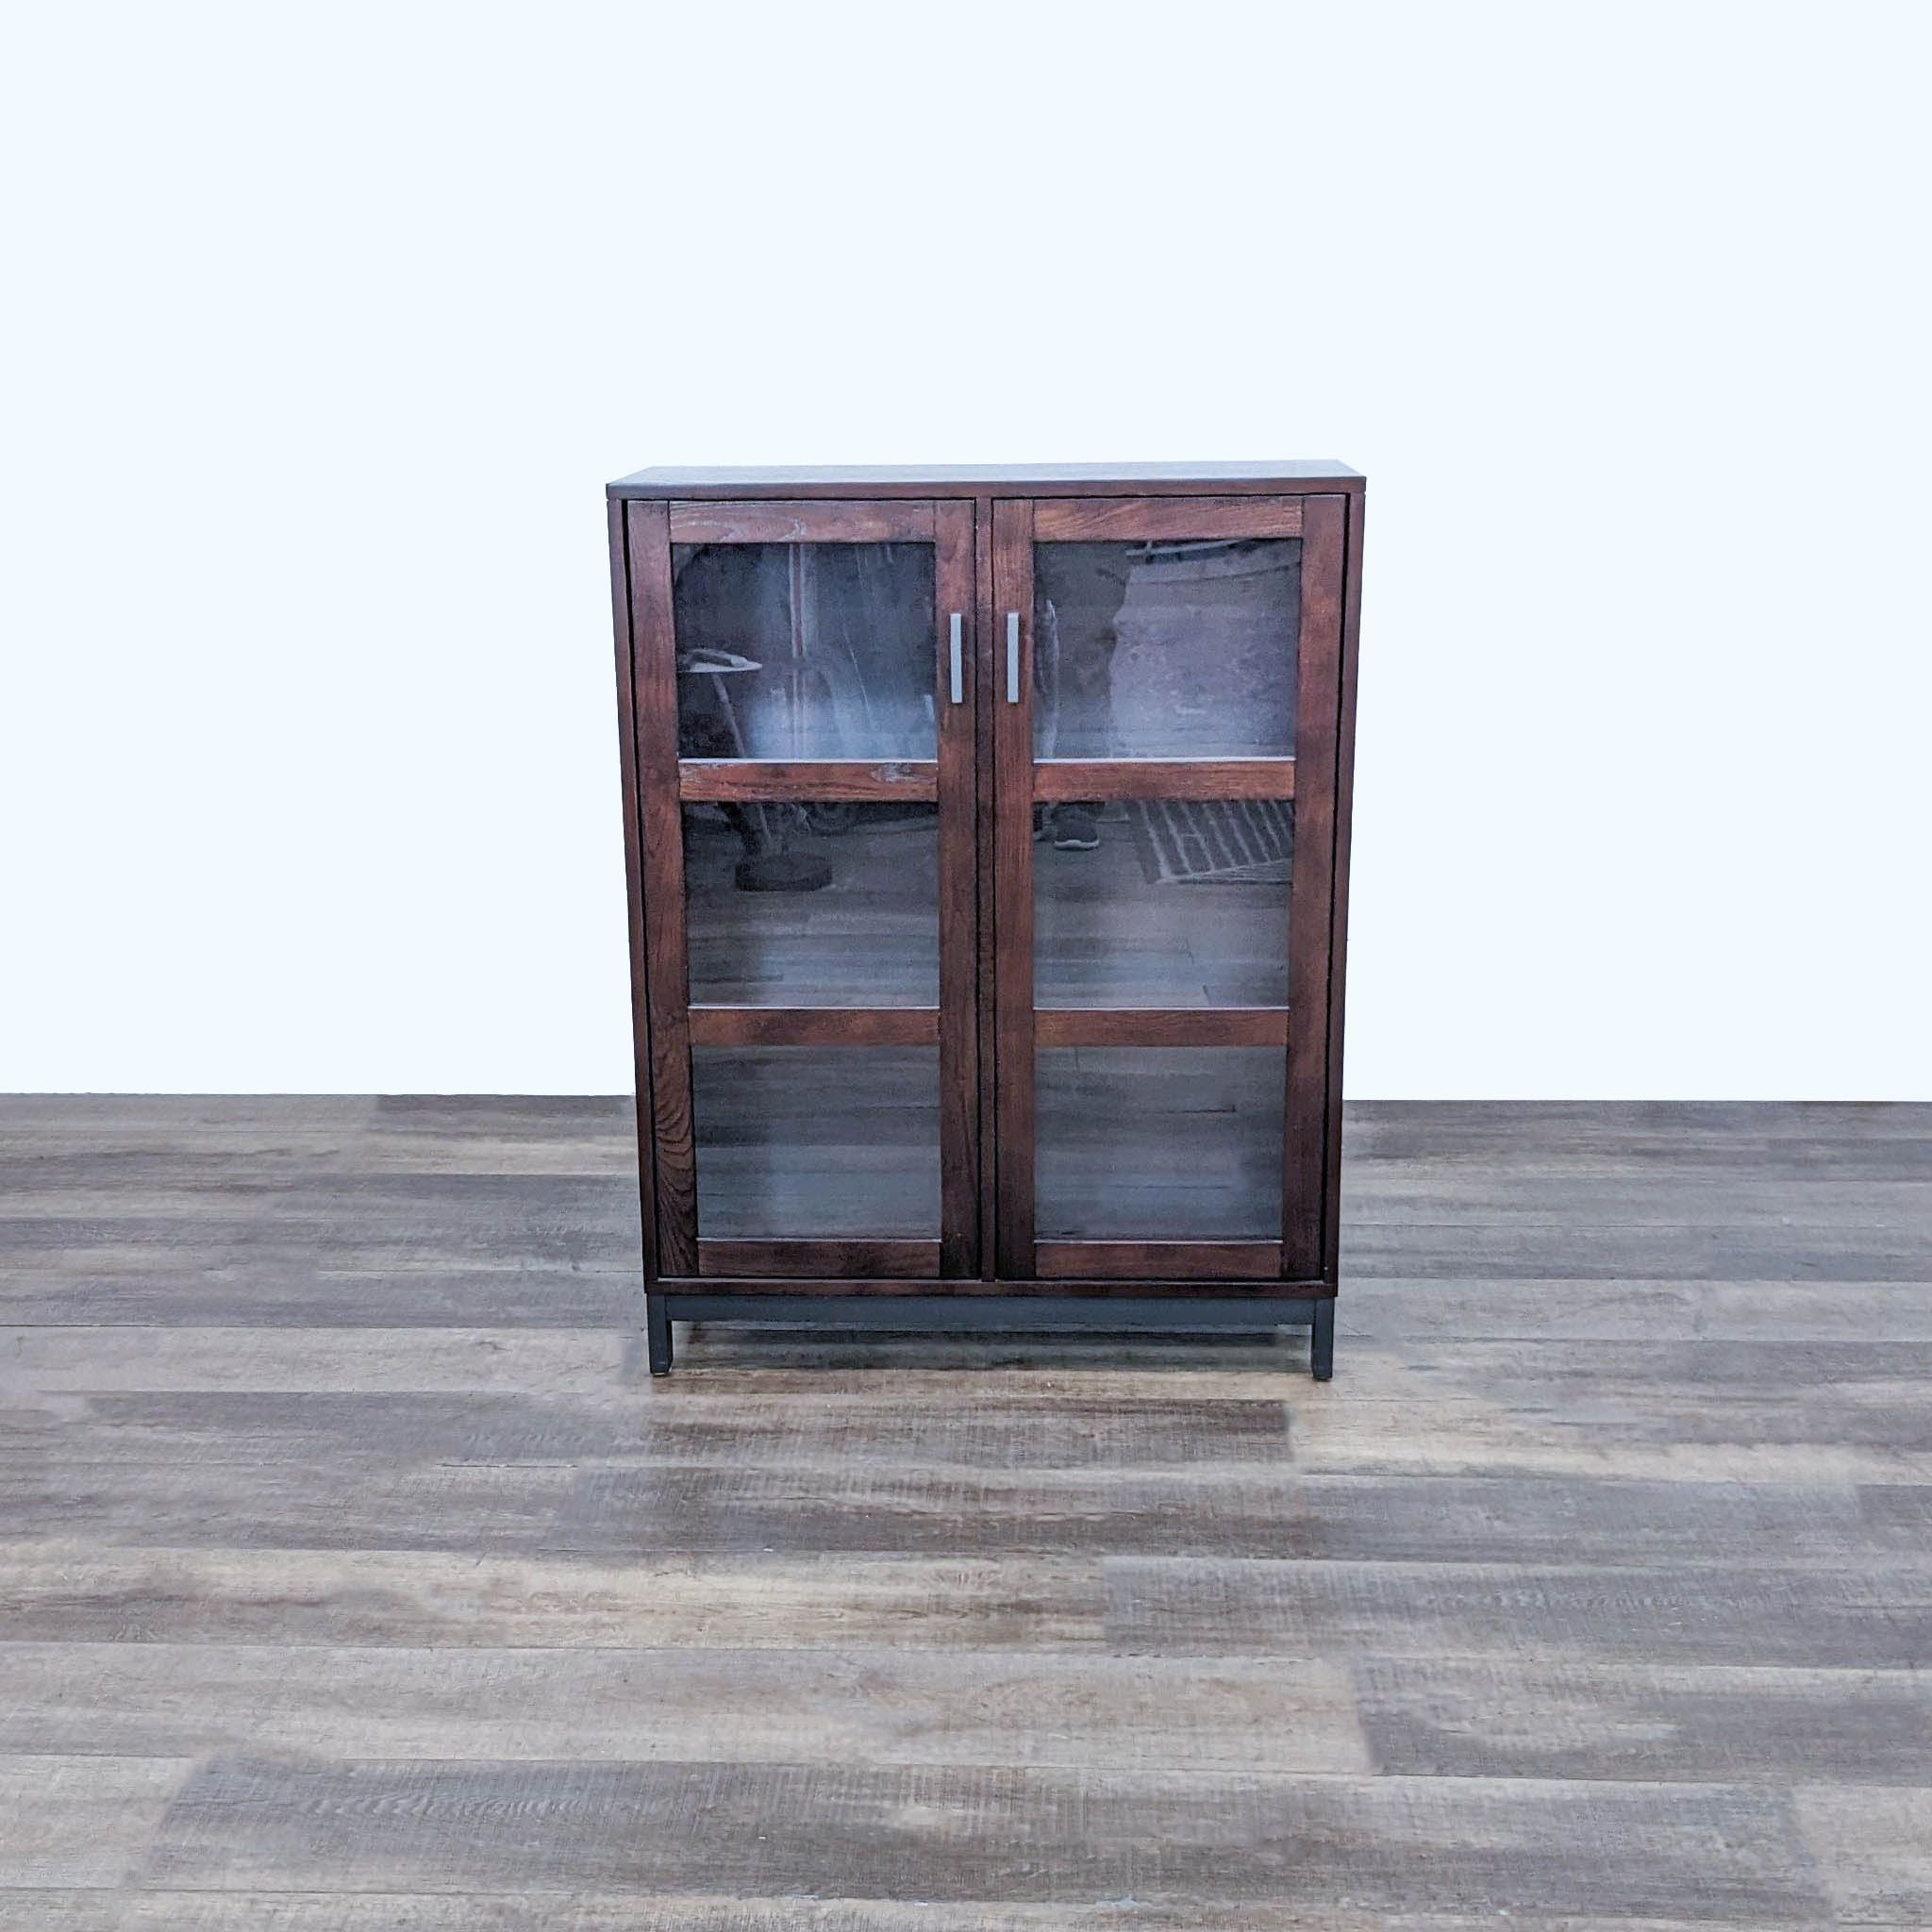 Crate & Barrel cabinet with glass doors and empty shelves against a wall.